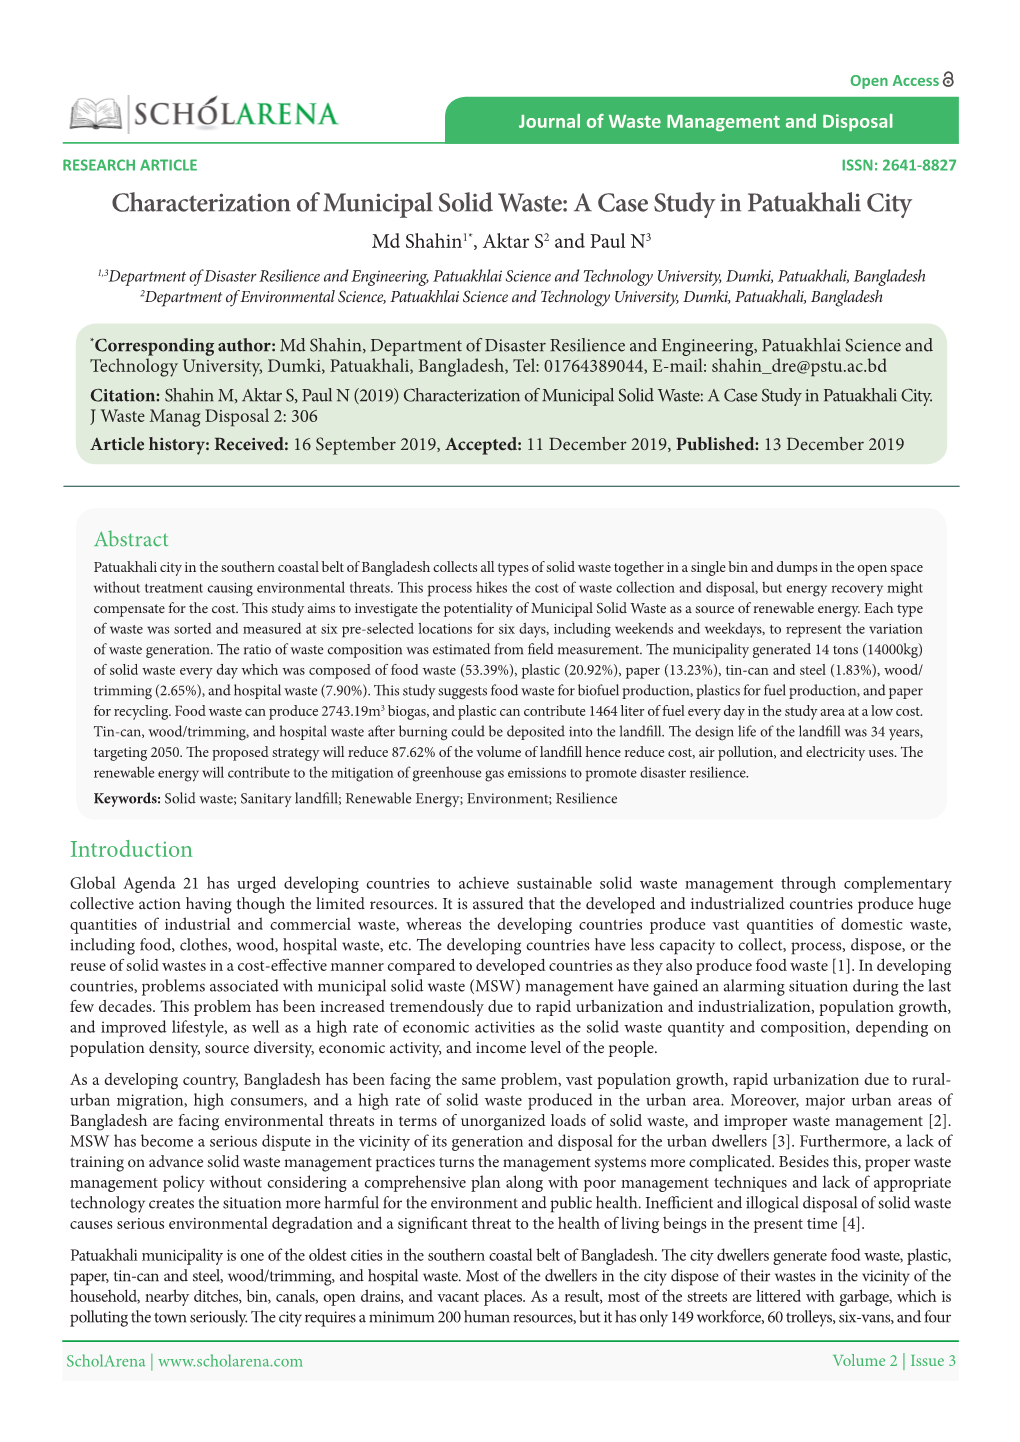 Characterization of Municipal Solid Waste: a Case Study in Patuakhali